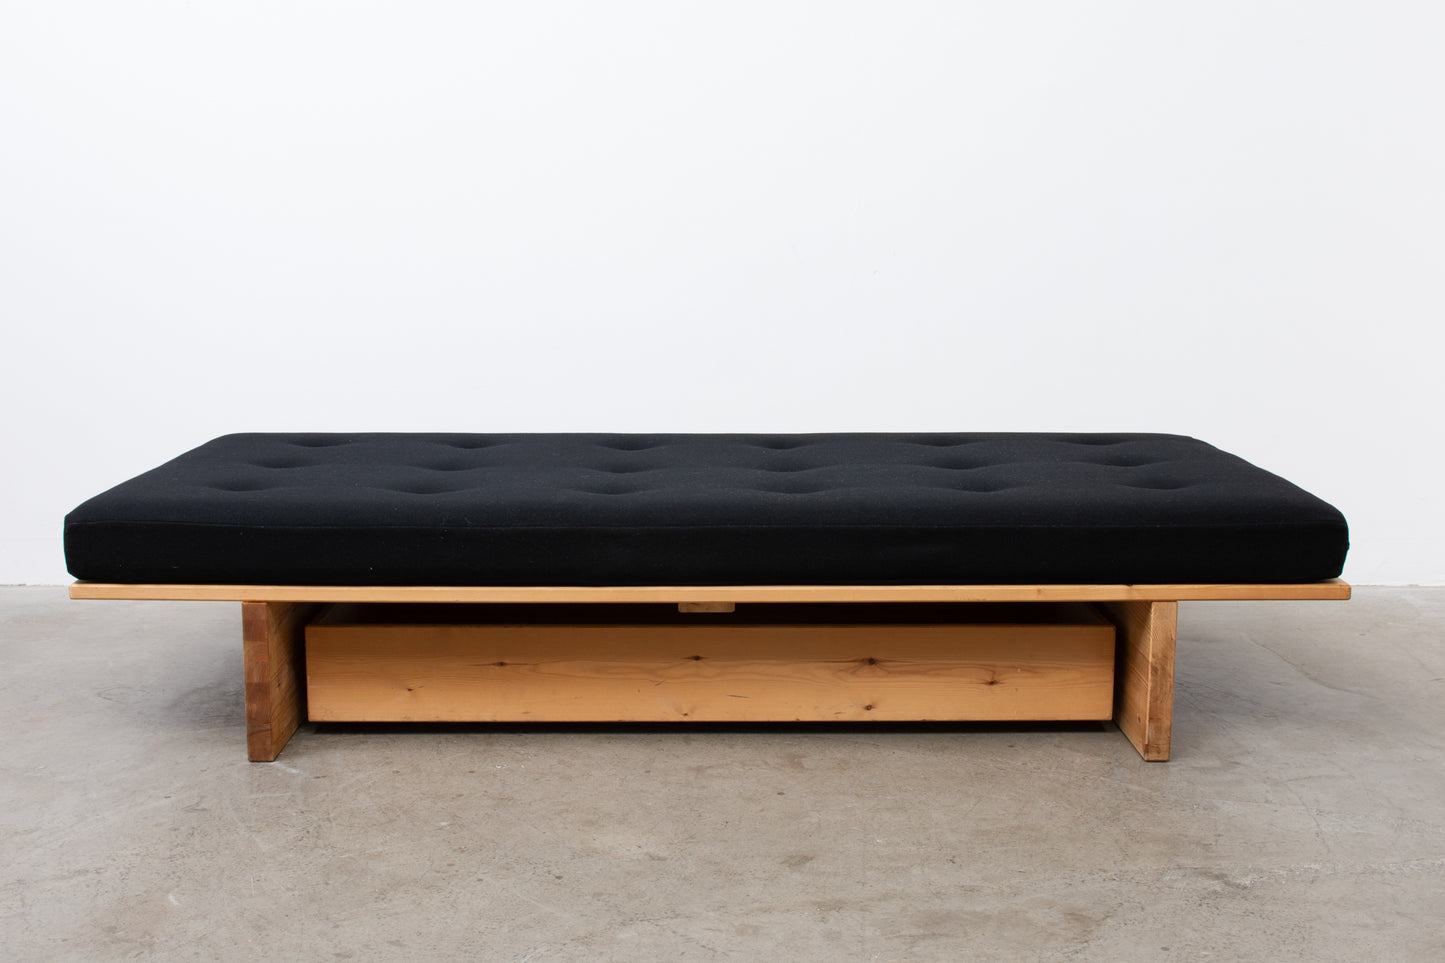 1970s pine day bed by Nyt i Bo